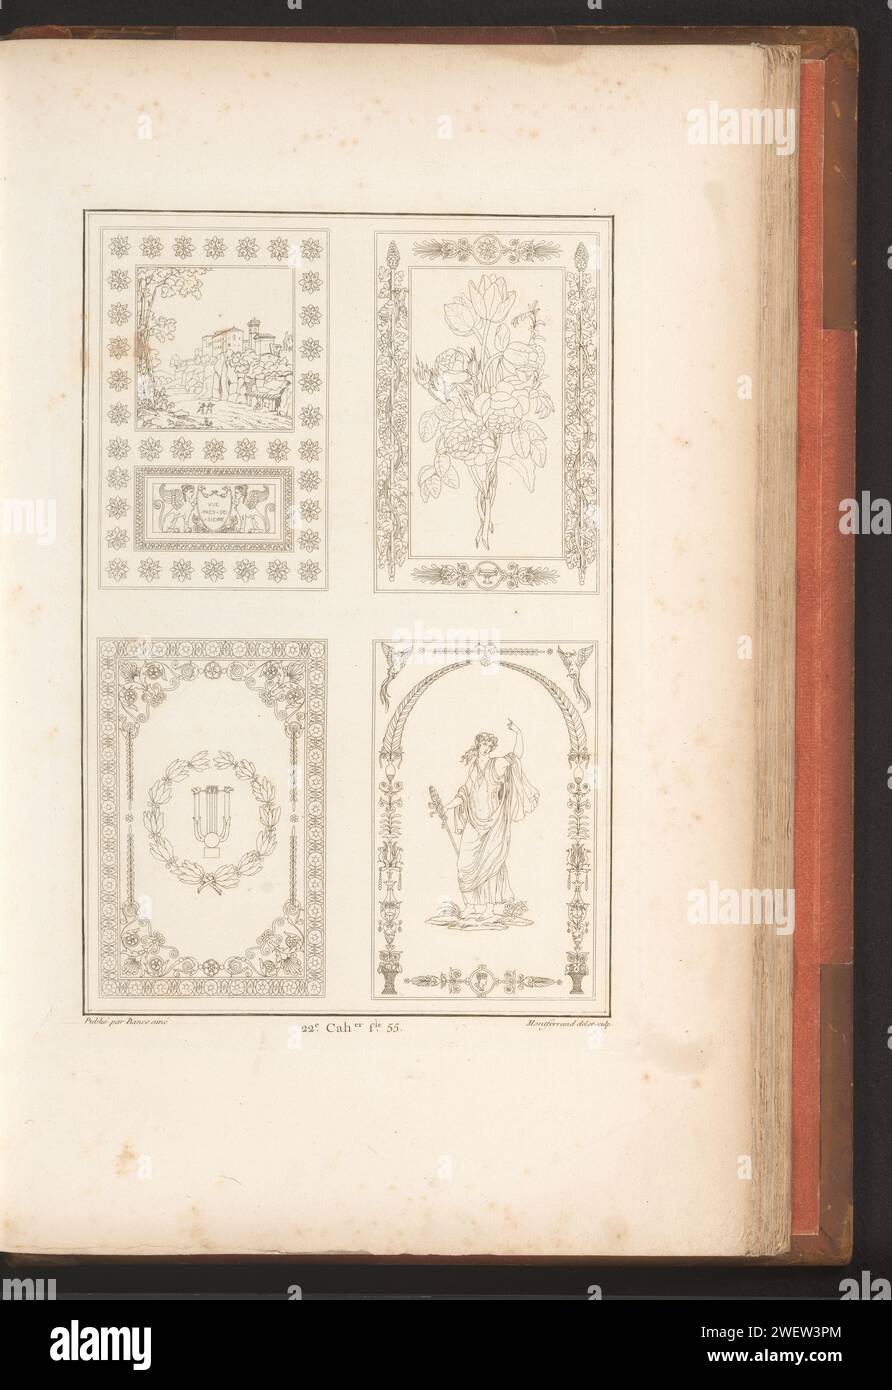 Ceiling decorations or wall rugs, August Ricard de Montferrand, 1820  Four figurative ceiling or wall decorations or wall rugs. Part (22nd. Cah.er F.LE 55) of the Prentalbum with two series of a total of 138 ornament prints by Beauvallet and Normand, 'Fragmens d'Ortuens dance le style antique'.  paper etching ornaments  art. (decorated) ceiling. carpet, rug Stock Photo